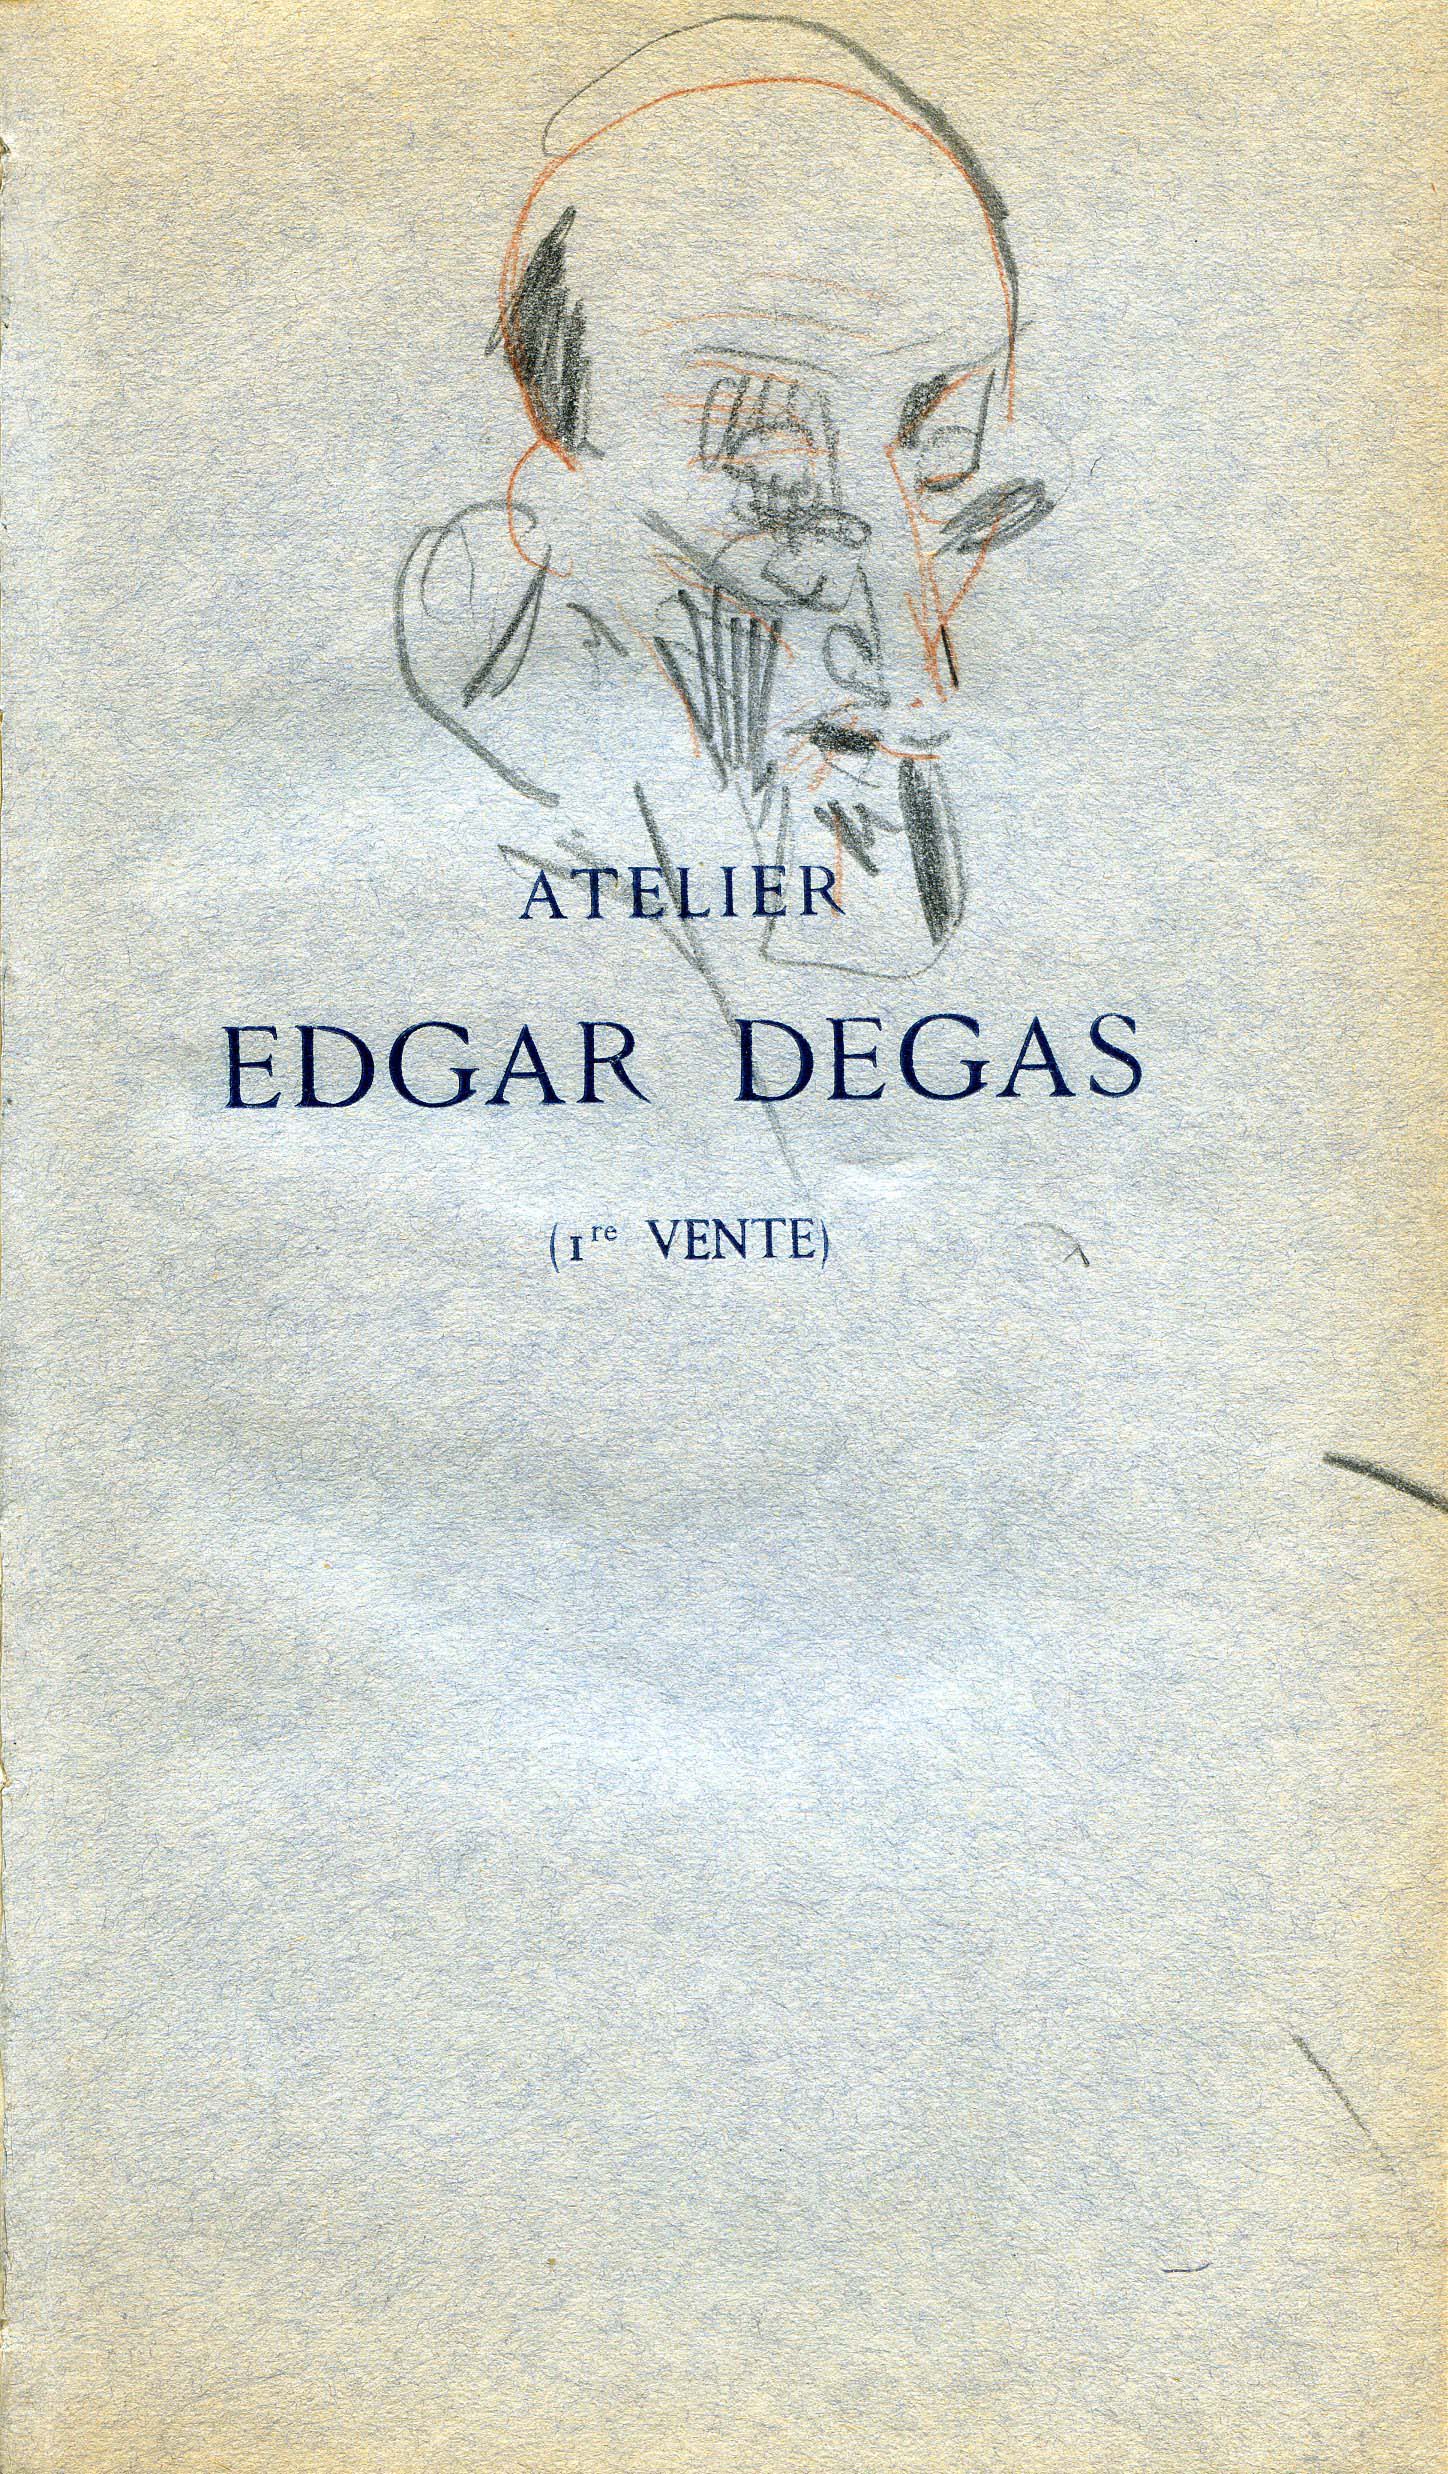 Drawing by Paul César Helleu on the front flyleaf of the Bliss copy of Atelier Edgar Degas (1re Vente).